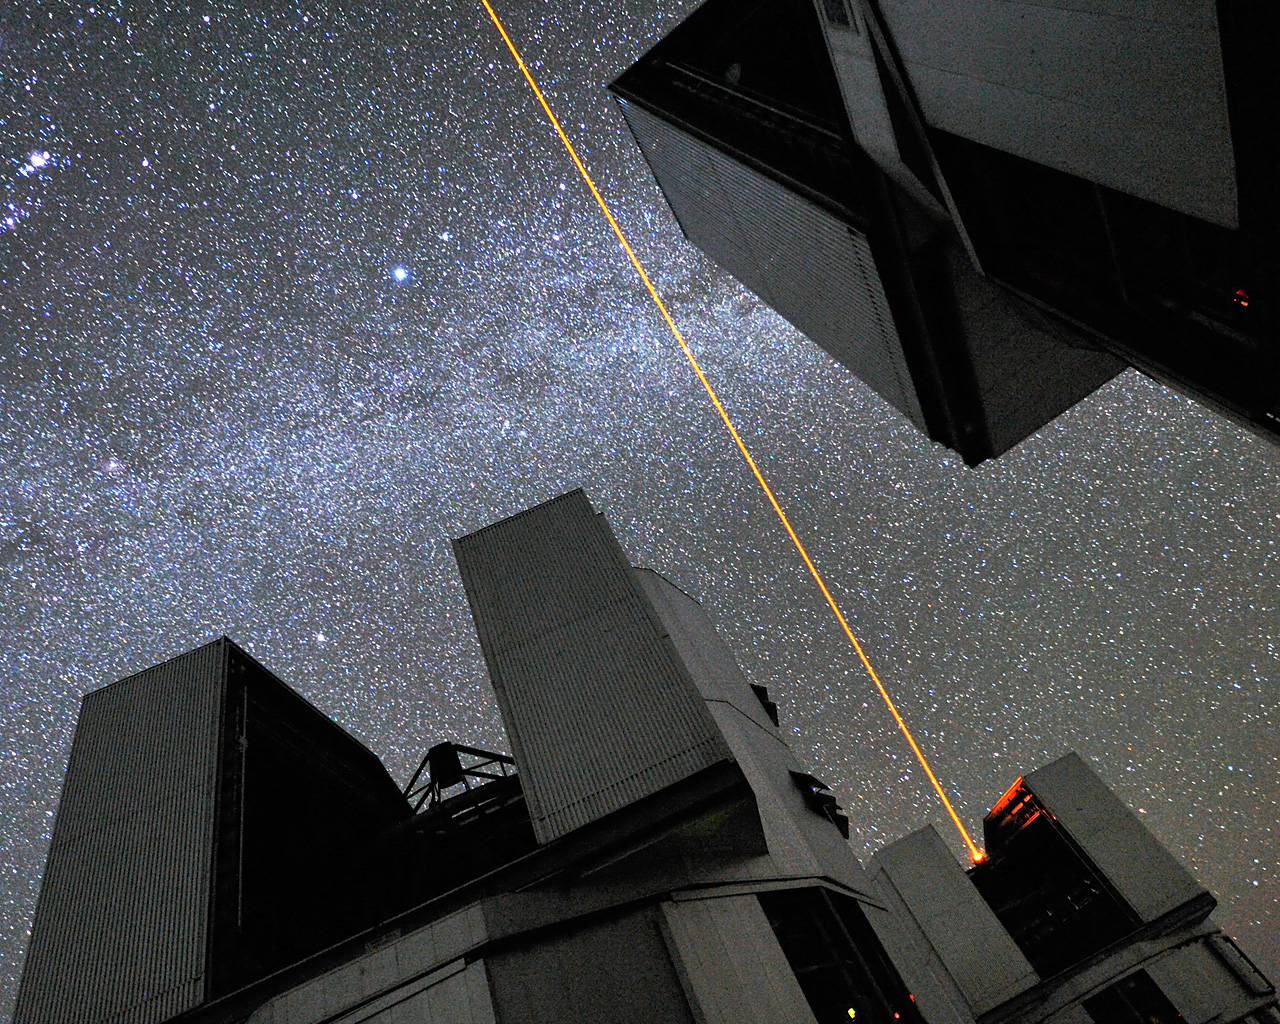 Photograph taken lying down at the paranal observatory, showing Very large telescope unit telescope and the sky.